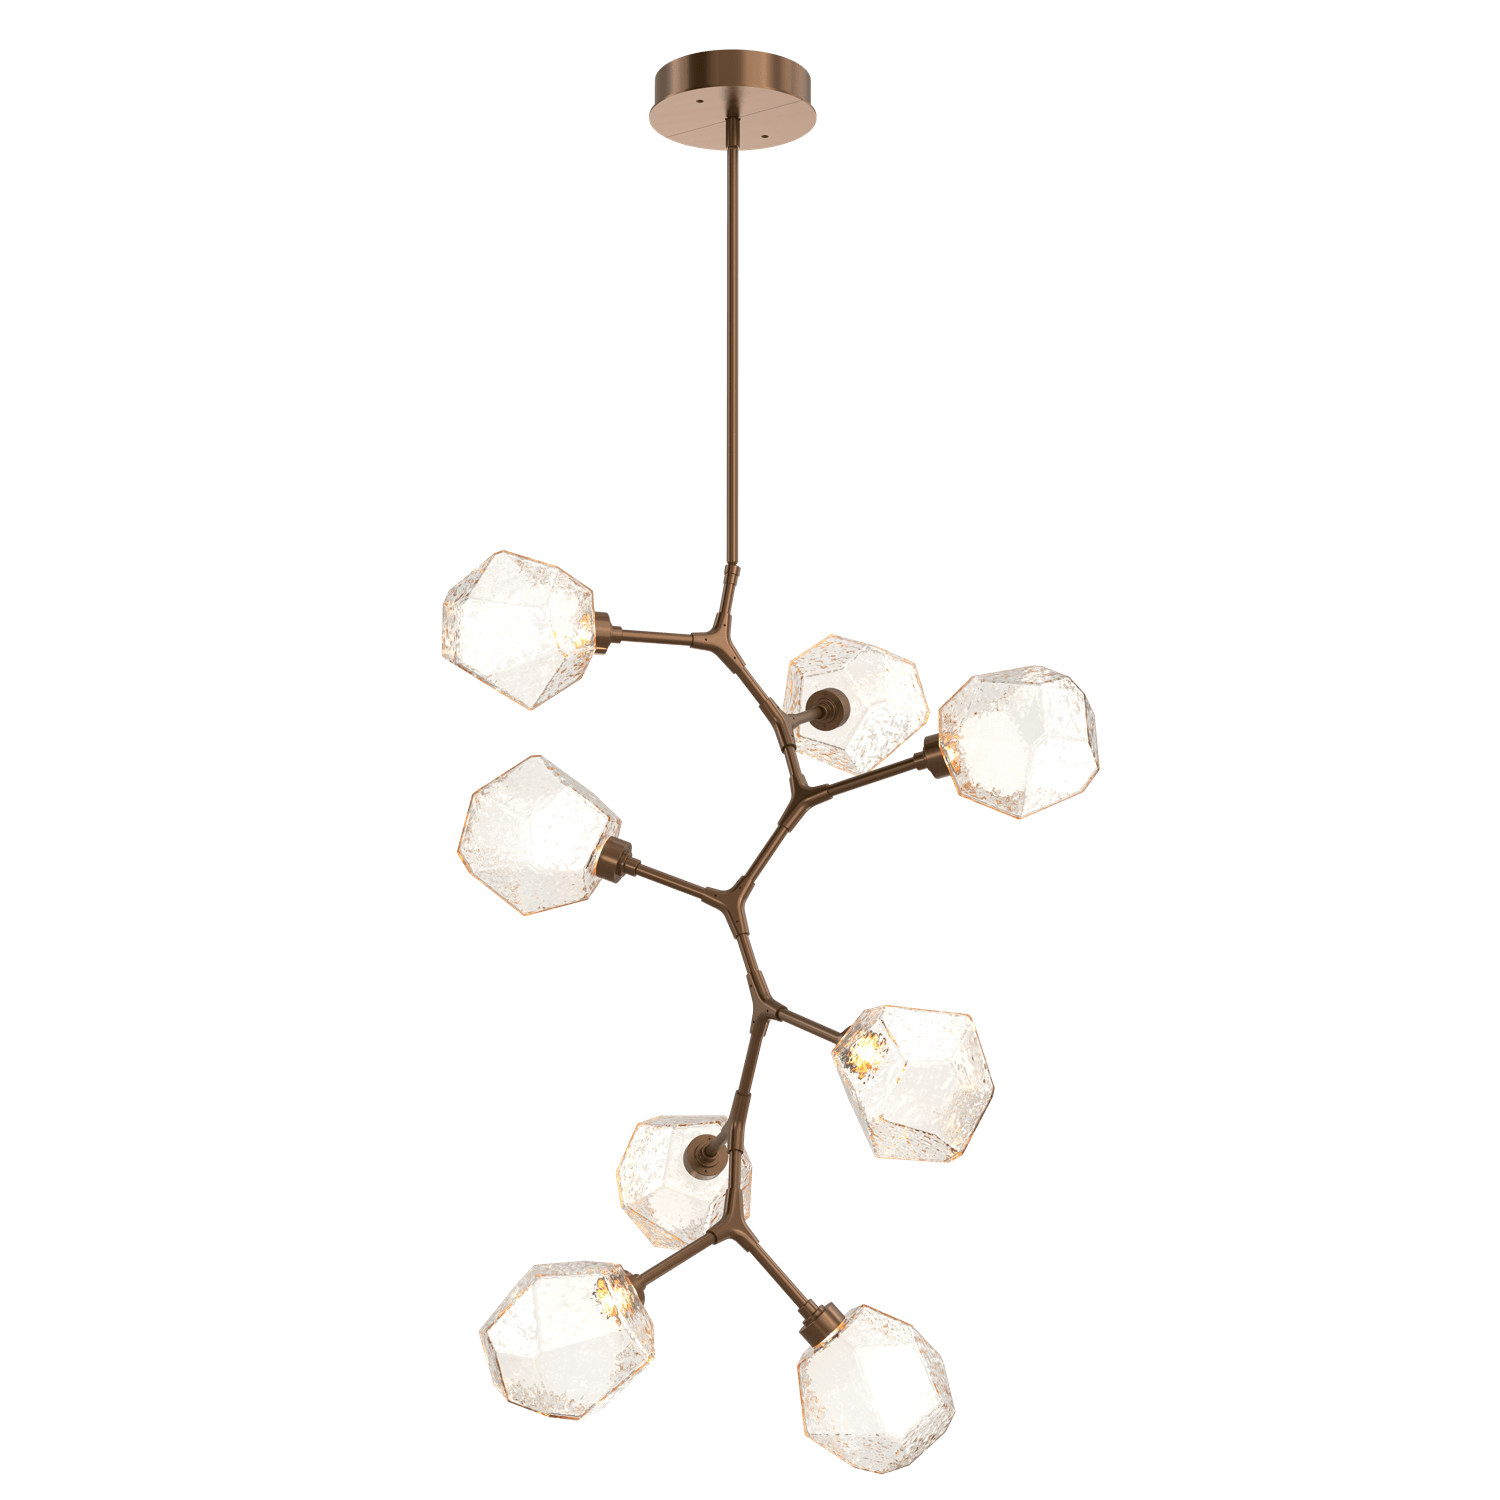 CHB0039-VB-RB-A-Hammerton-Studio-Gem-8-light-modern-vine-chandelier-with-oil-rubbed-bronze-finish-and-amber-blown-glass-shades-and-LED-lamping